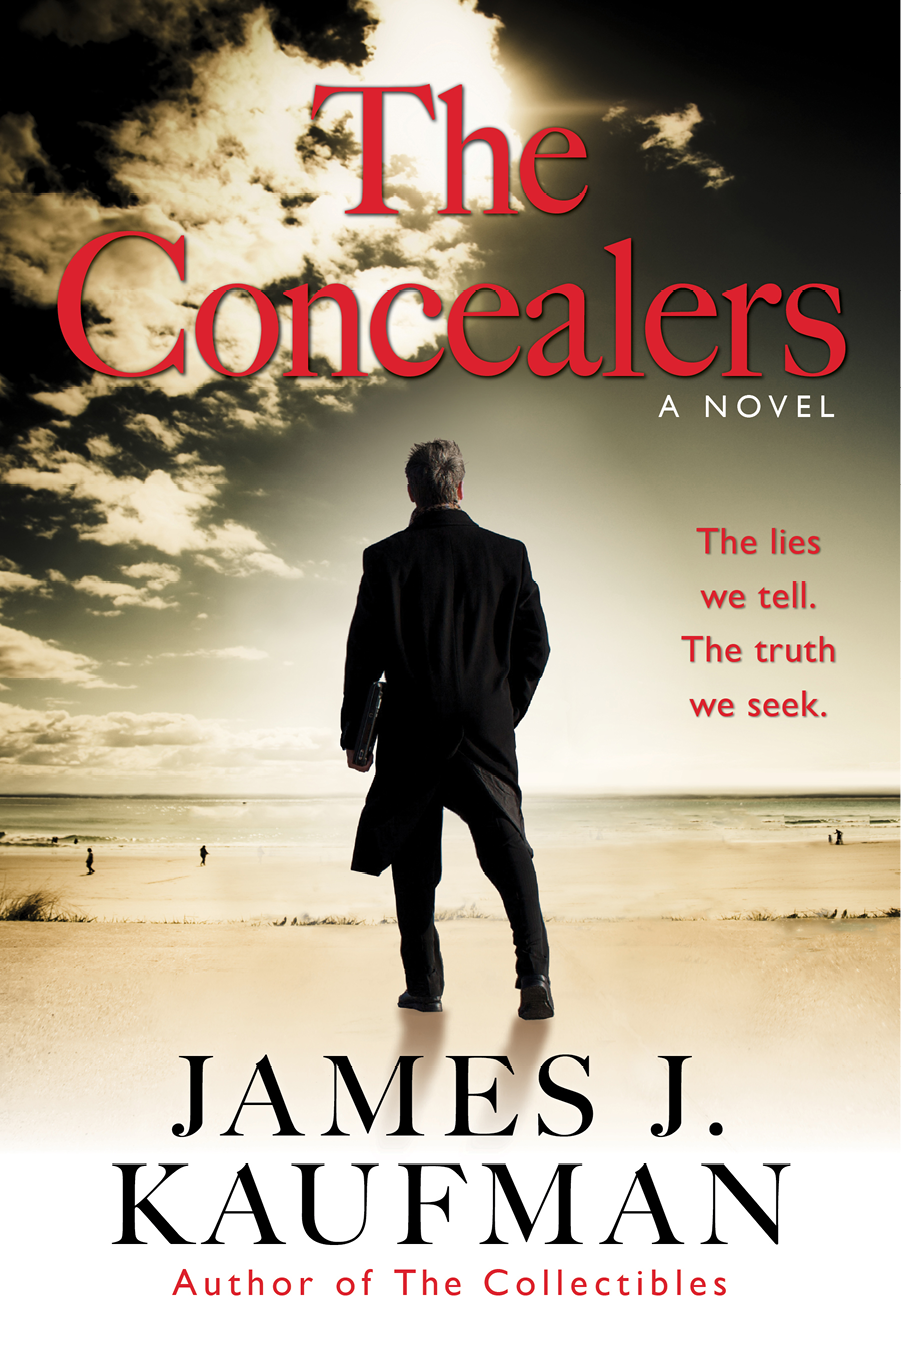 The Concealers (2013) by James J. Kaufman